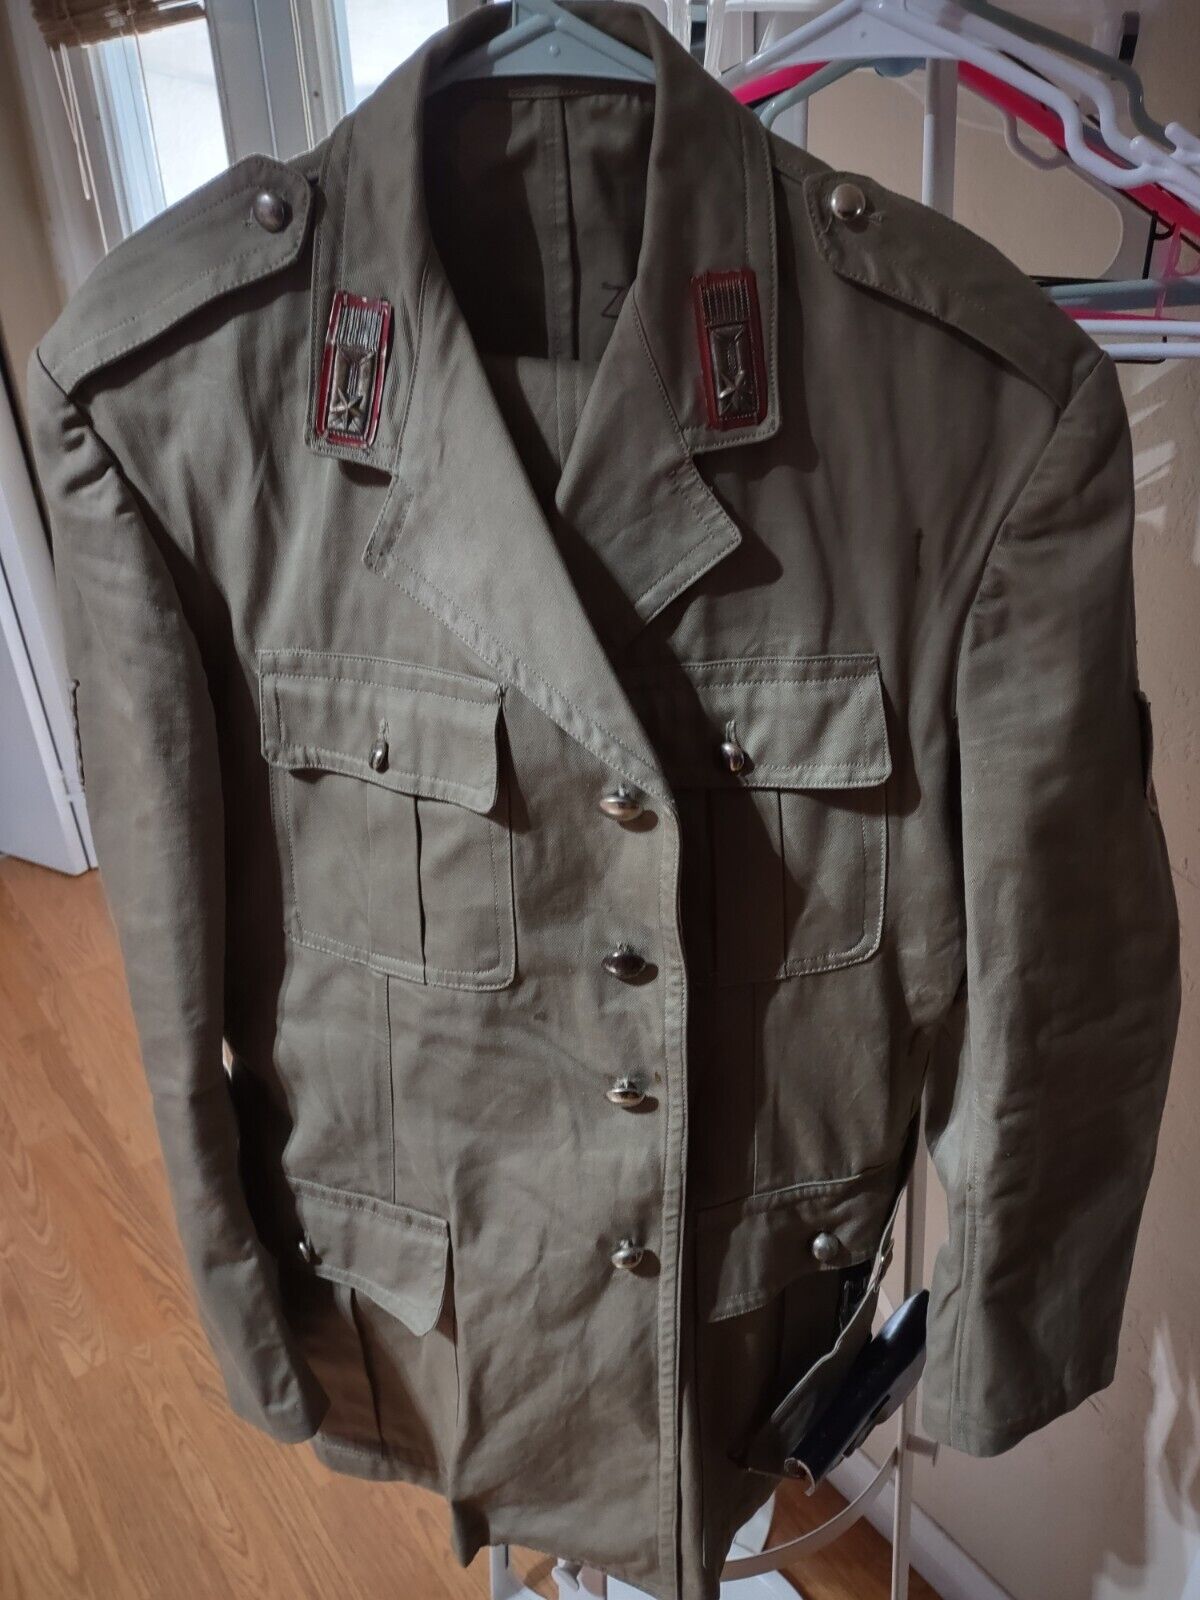 Carabinieri Summer Uniform 70s (full) with hat and holster